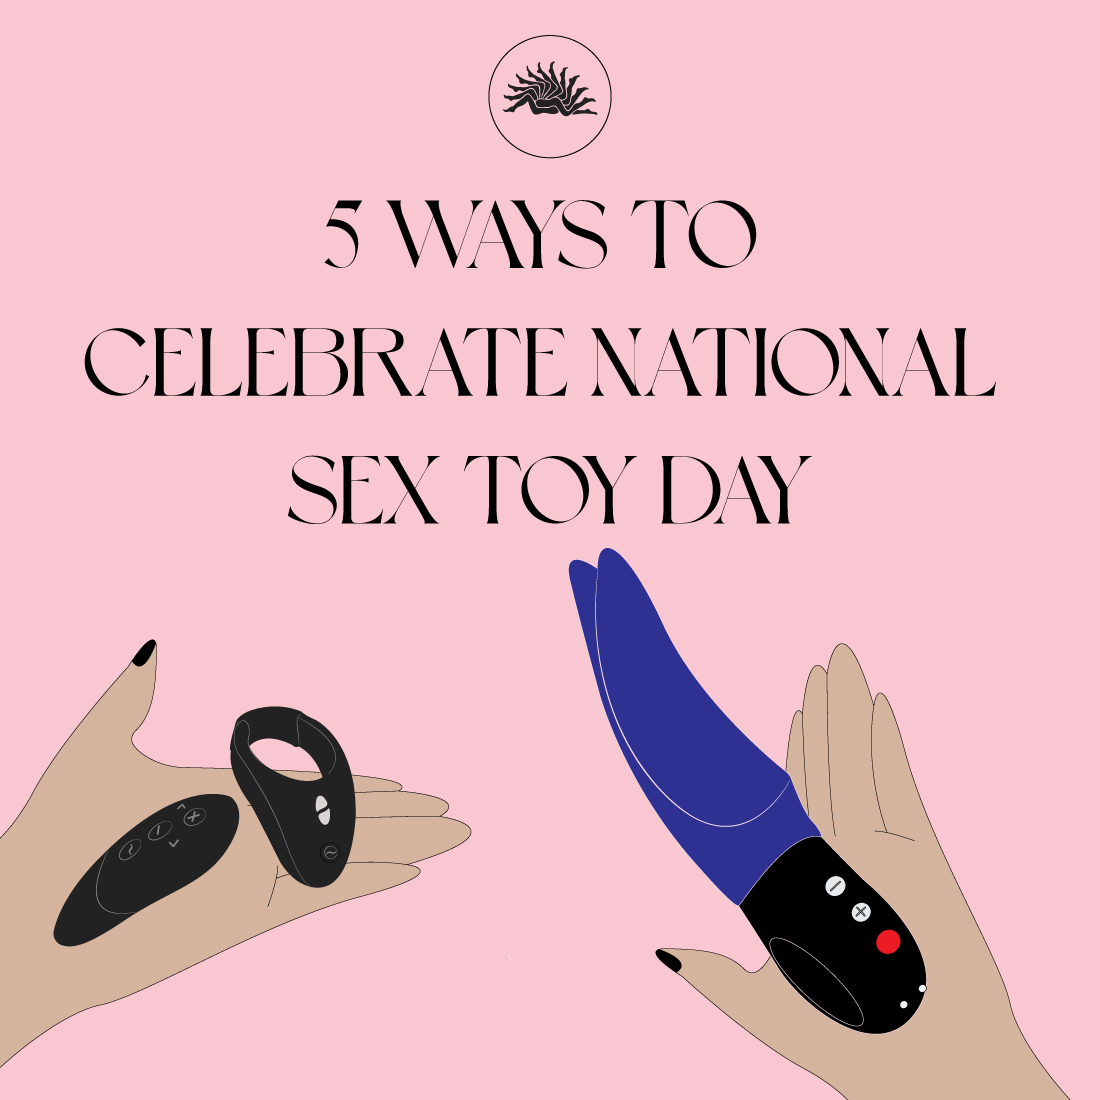 5 Ways to Celebrate National Sex Toy Day illustration with hands holding We-Vibe Tease Us Set and Fun Factory Volta